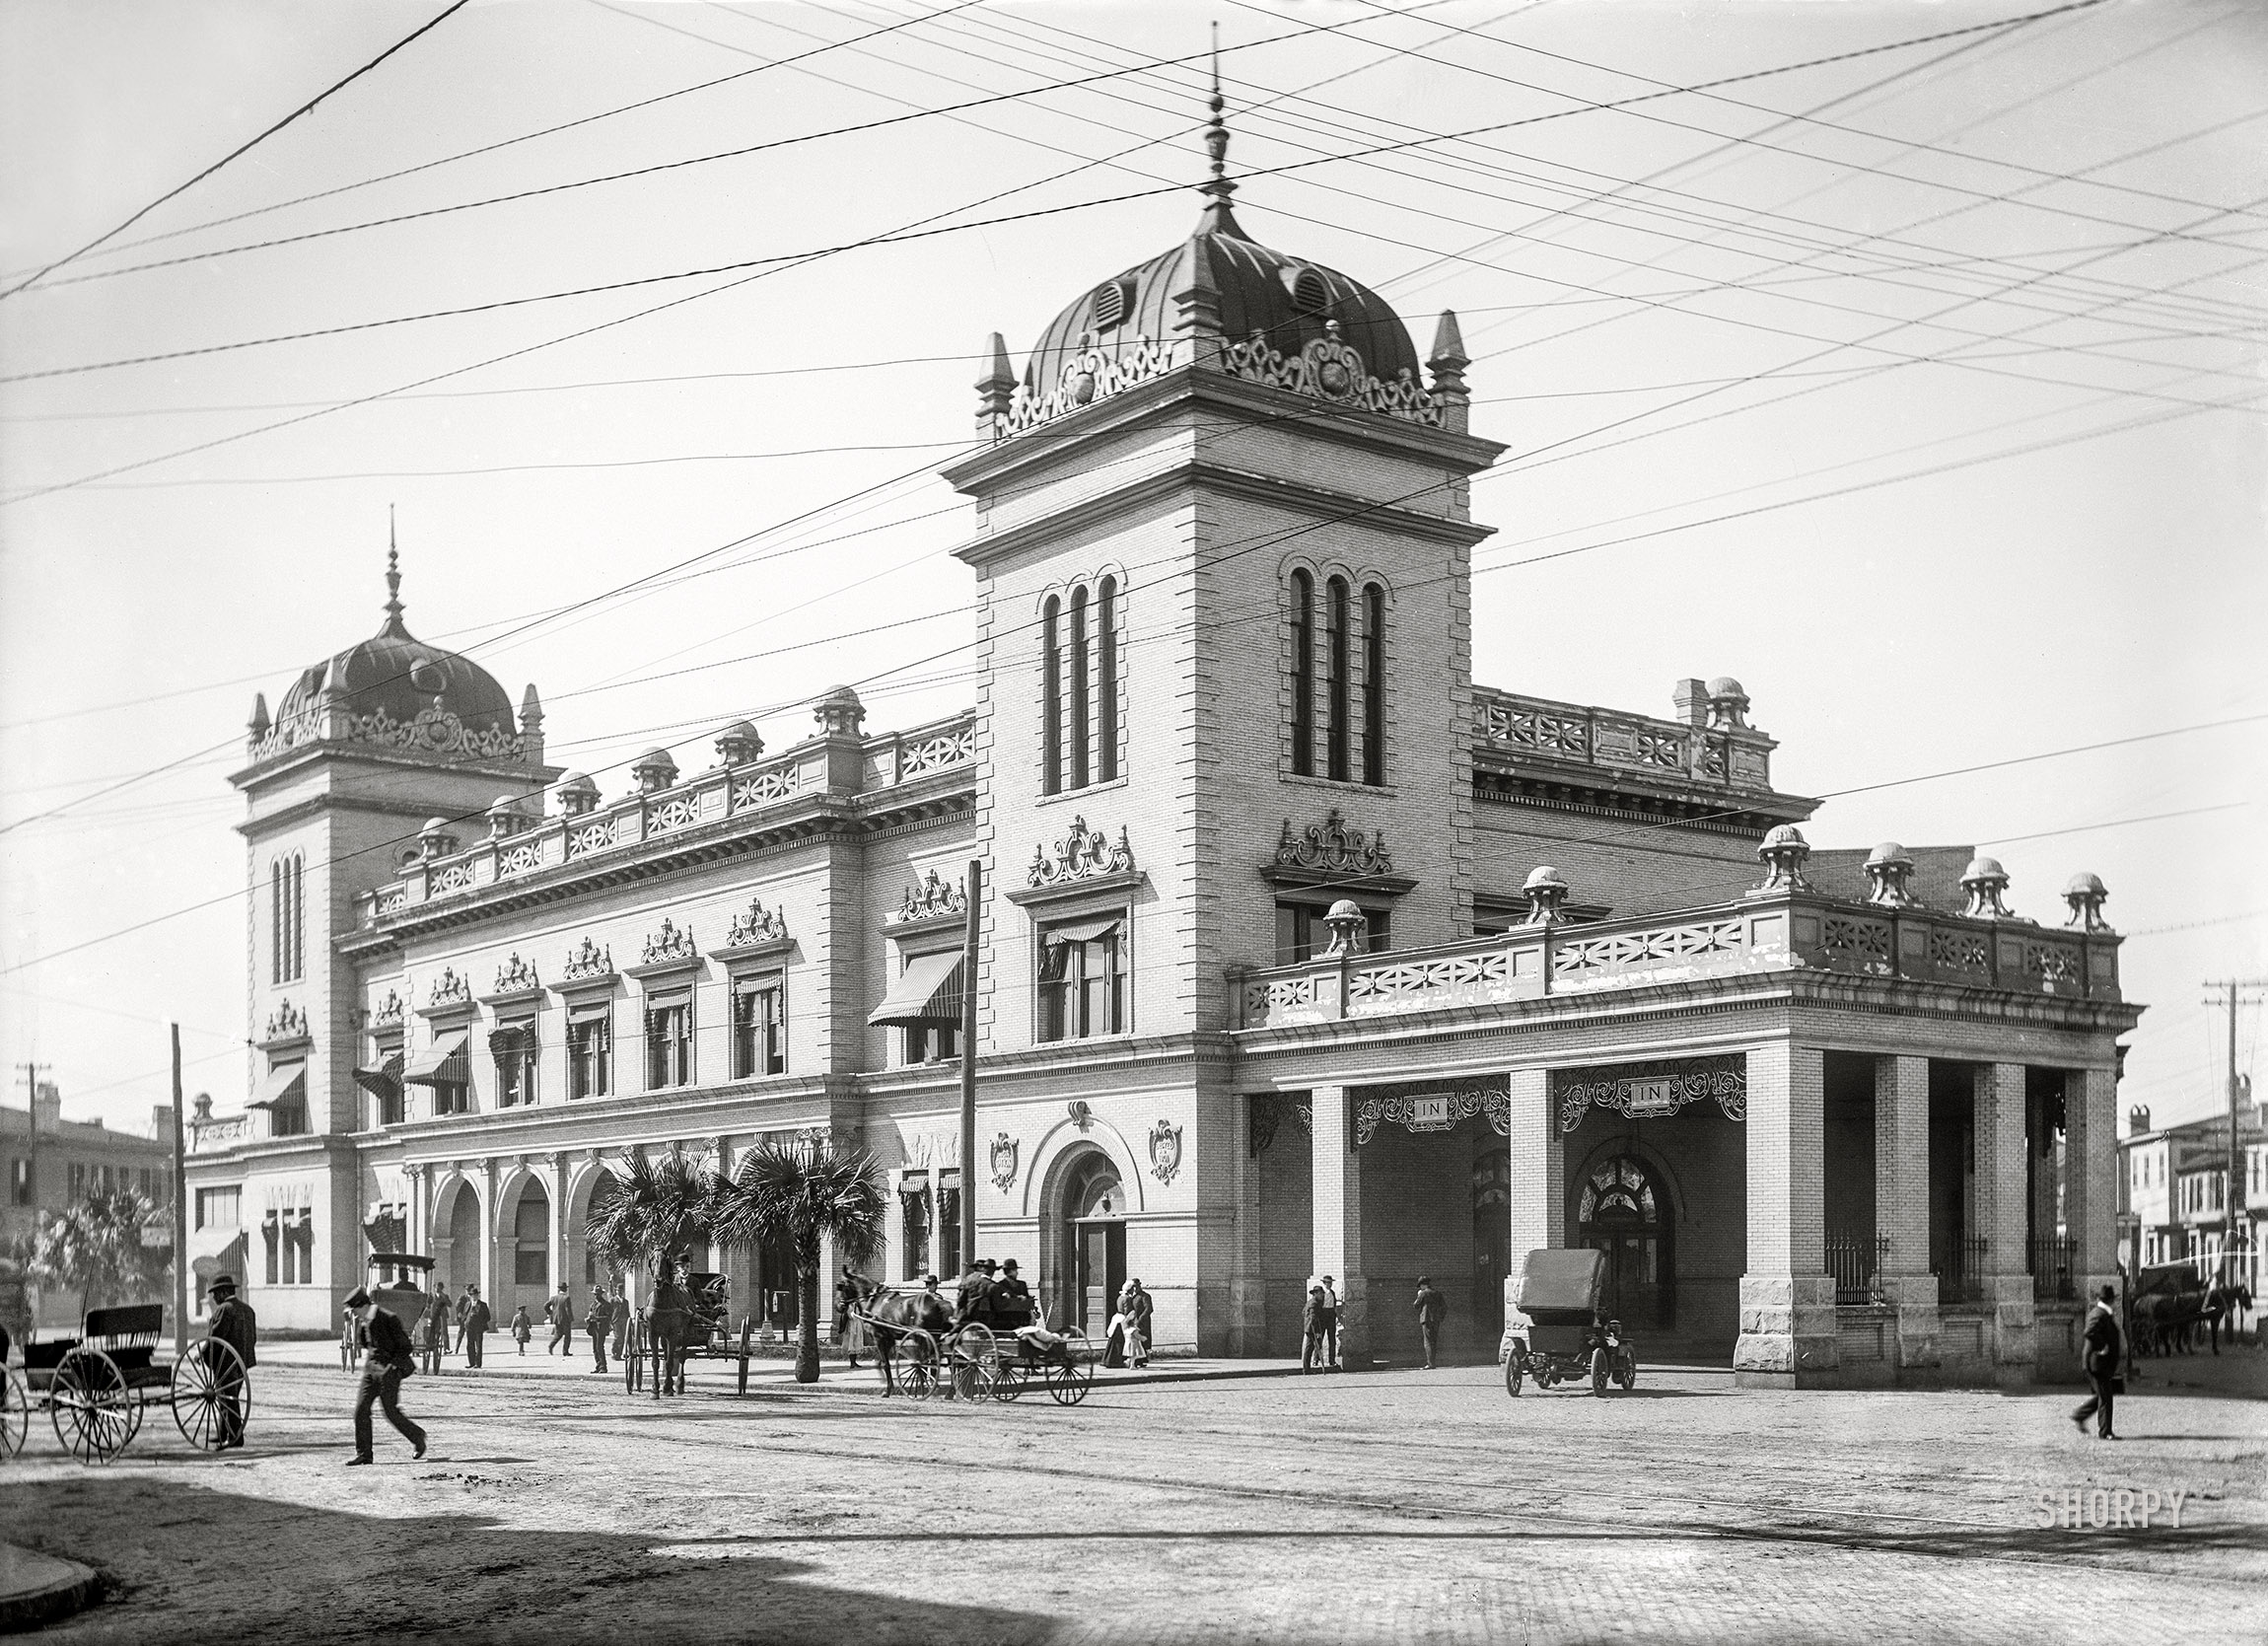 1906. "Savannah, Georgia -- Union Station." (Did anyone think of calling it Confederate Station?) 5x7 inch dry plate glass negative, Detroit Publishing Company. View full size.